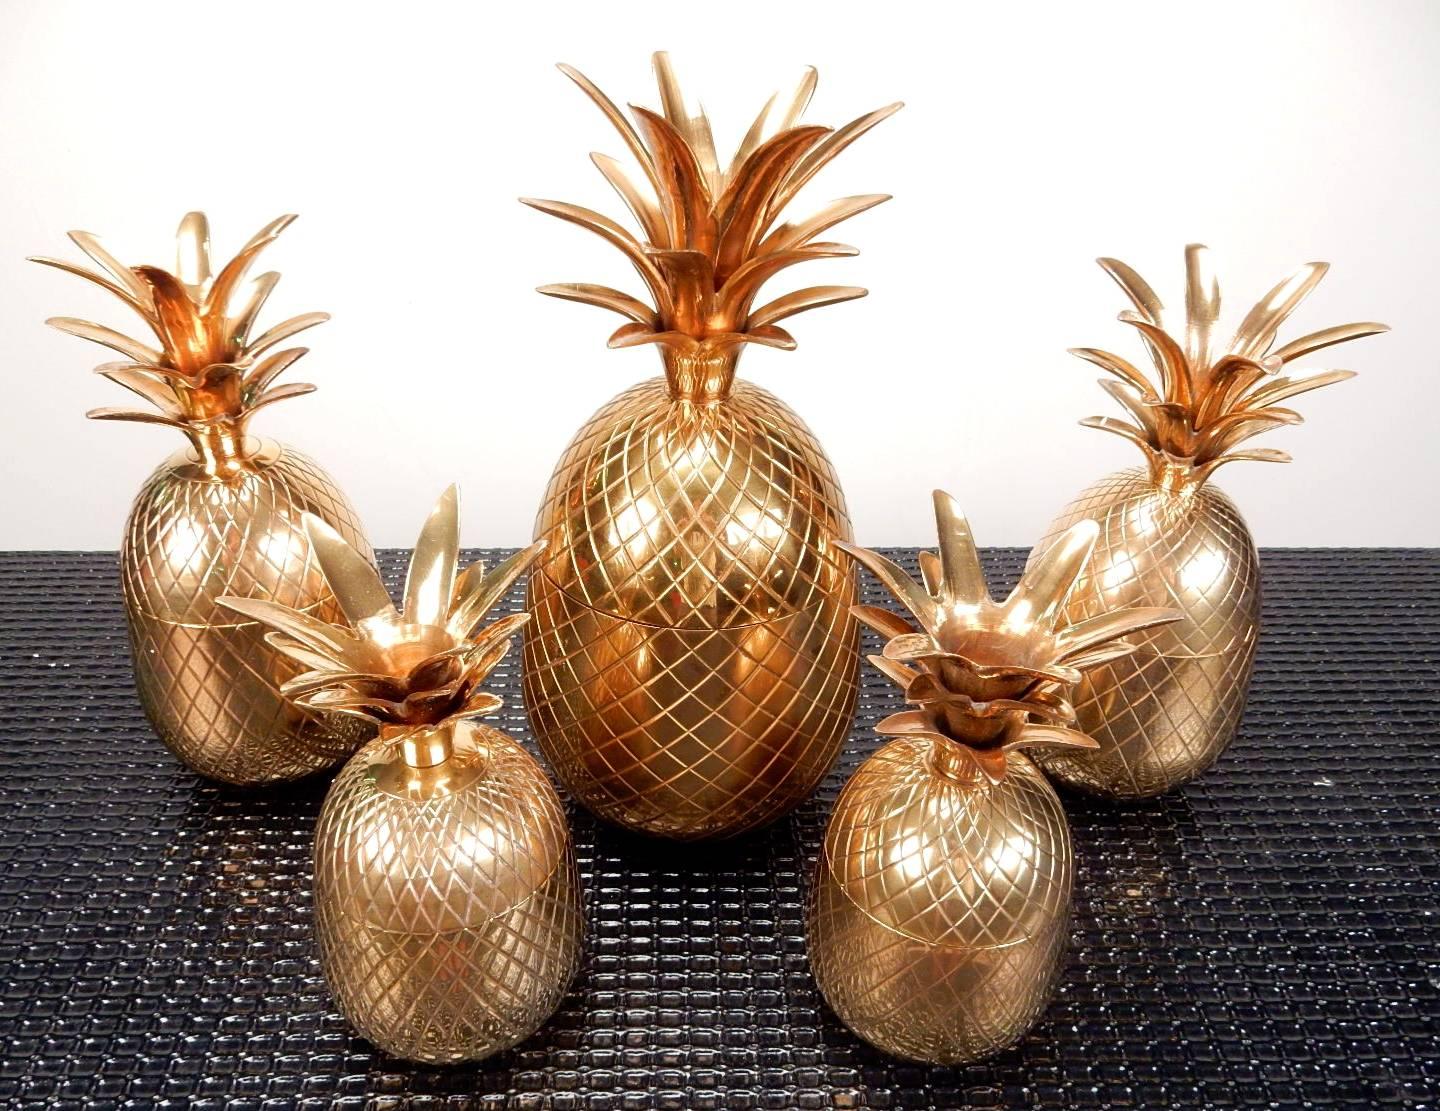 Instant collection of five solid brass Pineapple shape boxes by Frederick Cooper of Chicago.
An amazing table top display.
They range from largest is 12-1/2 inch tall to two smallest are 7 inch tall.
circa 1970s, all are in very good